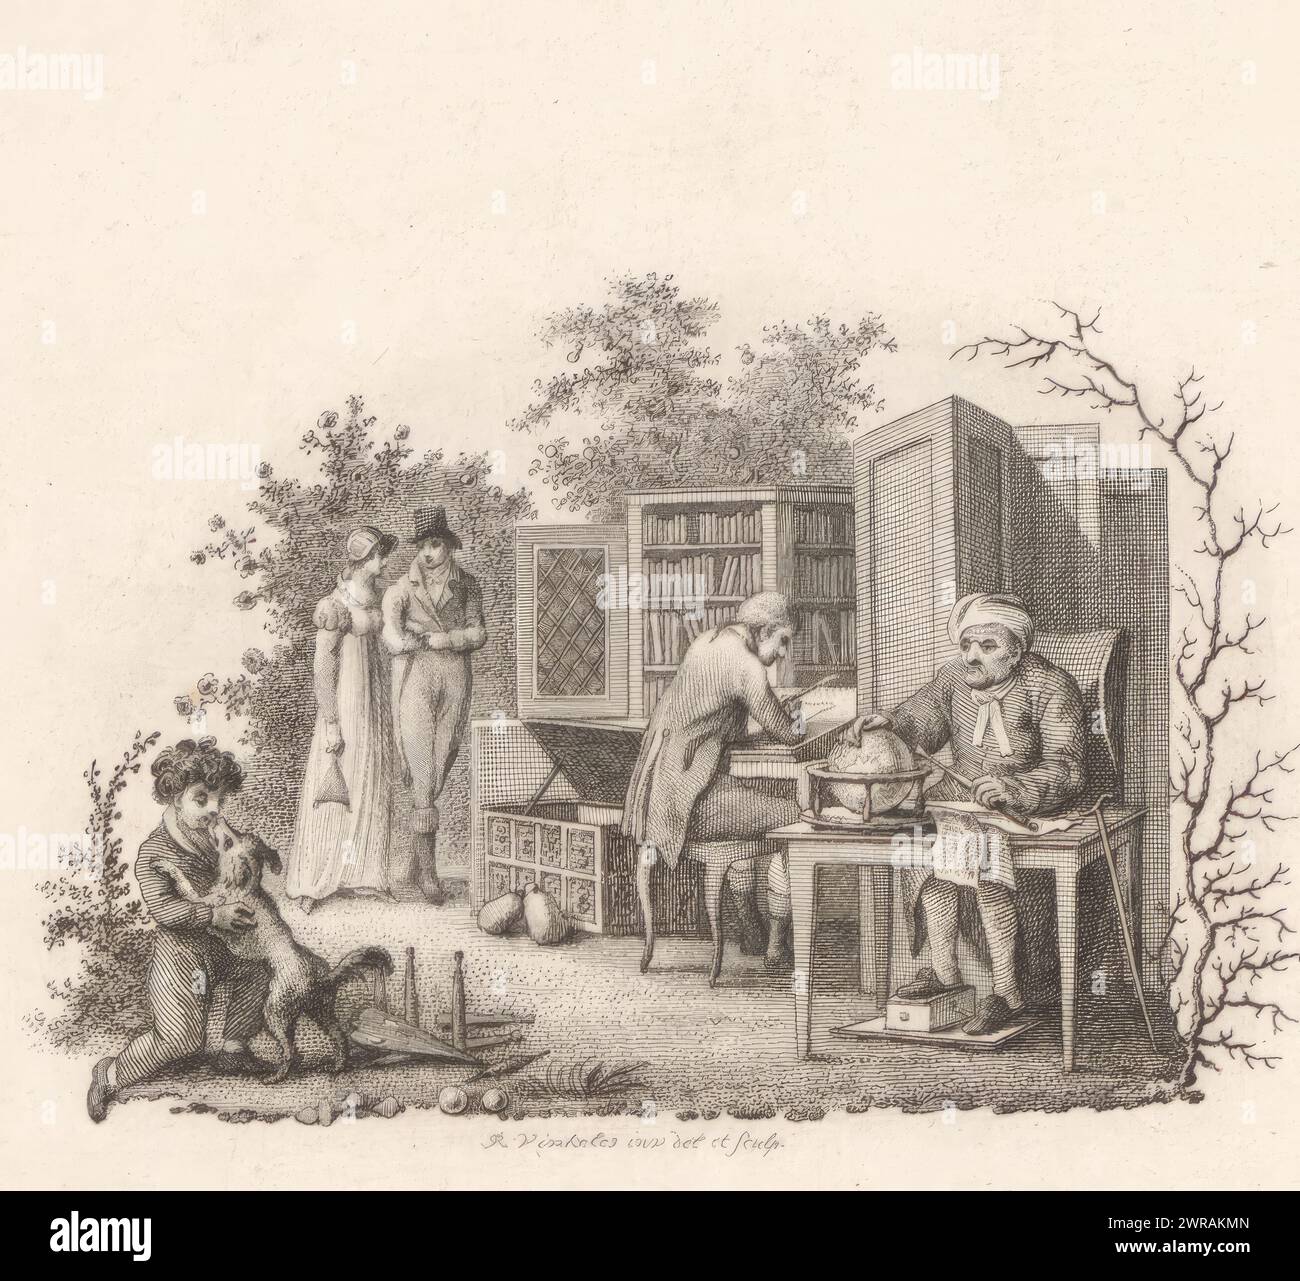 Four men at different ages, Title page for: Adriaan Pietersz. Loosjes, The man in the four epochs of his life, 1809, Title page with four men undertaking various activities at different ages. A boy plays with a dog. A young man walks with a lady by his side. The middle-aged man sits behind his writing desk and the old man has his hand on a globe. The print is part of an album., print maker: Reinier Vinkeles (I), after drawing by: Reinier Vinkeles (I), publisher: Adriaan Pietersz. Loosjes, Haarlem, 1809, paper, etching, engraving, height 237 mm × width 157 mm Stock Photo